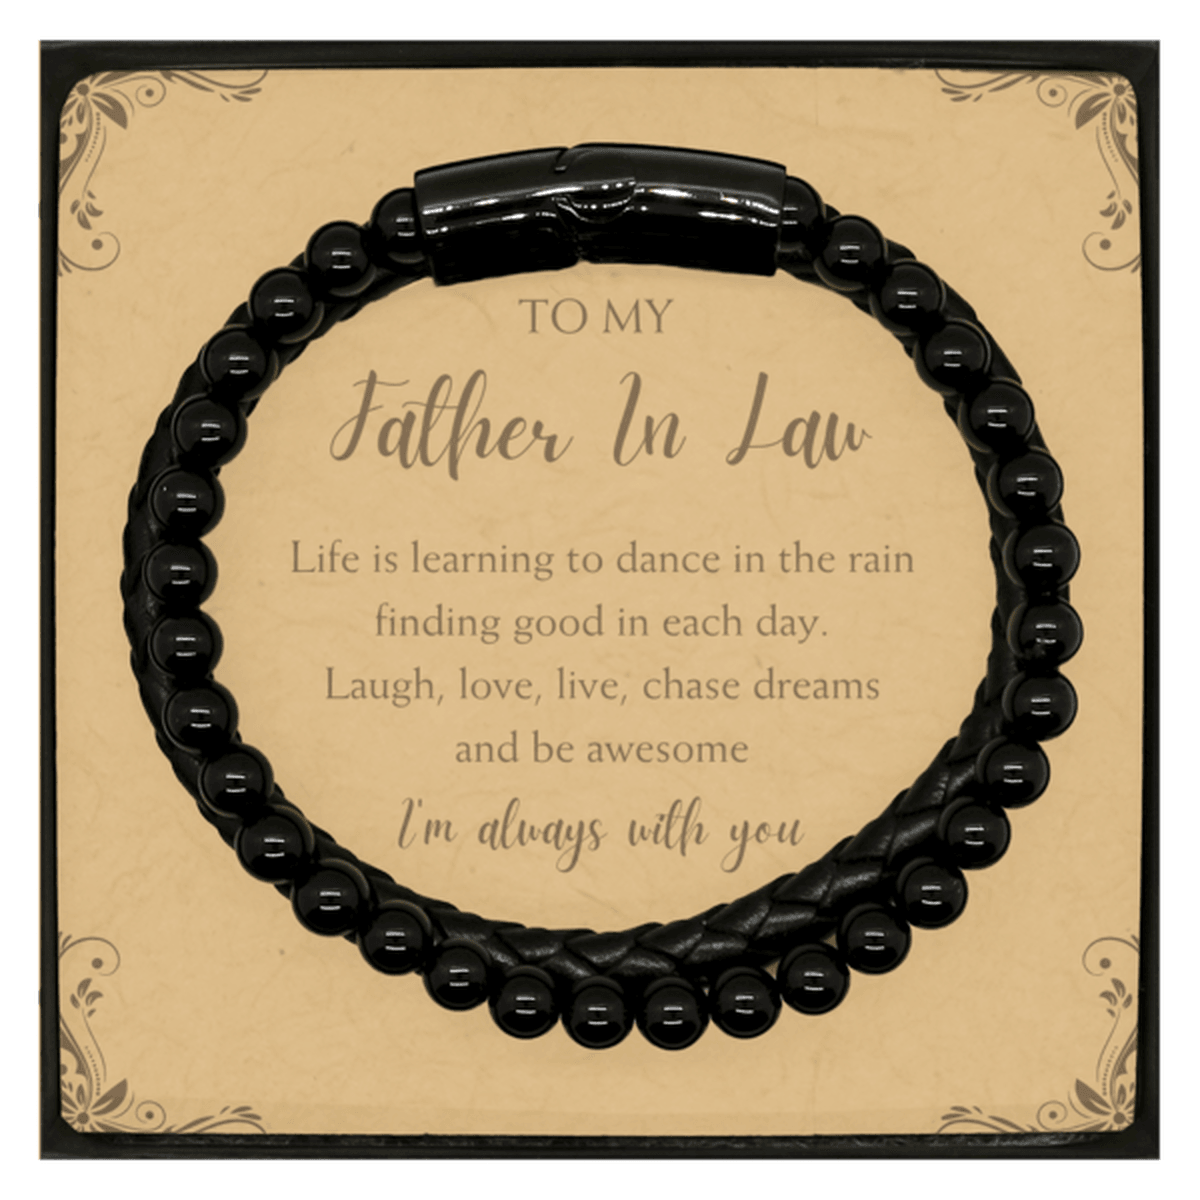 Father In Law Christmas Perfect Gifts, Father In Law Stone Leather Bracelets, Motivational Father In Law Message Card Gifts, Birthday Gifts For Father In Law, To My Father In Law Life is learning to dance in the rain, finding good in each day. I'm always - Mallard Moon Gift Shop